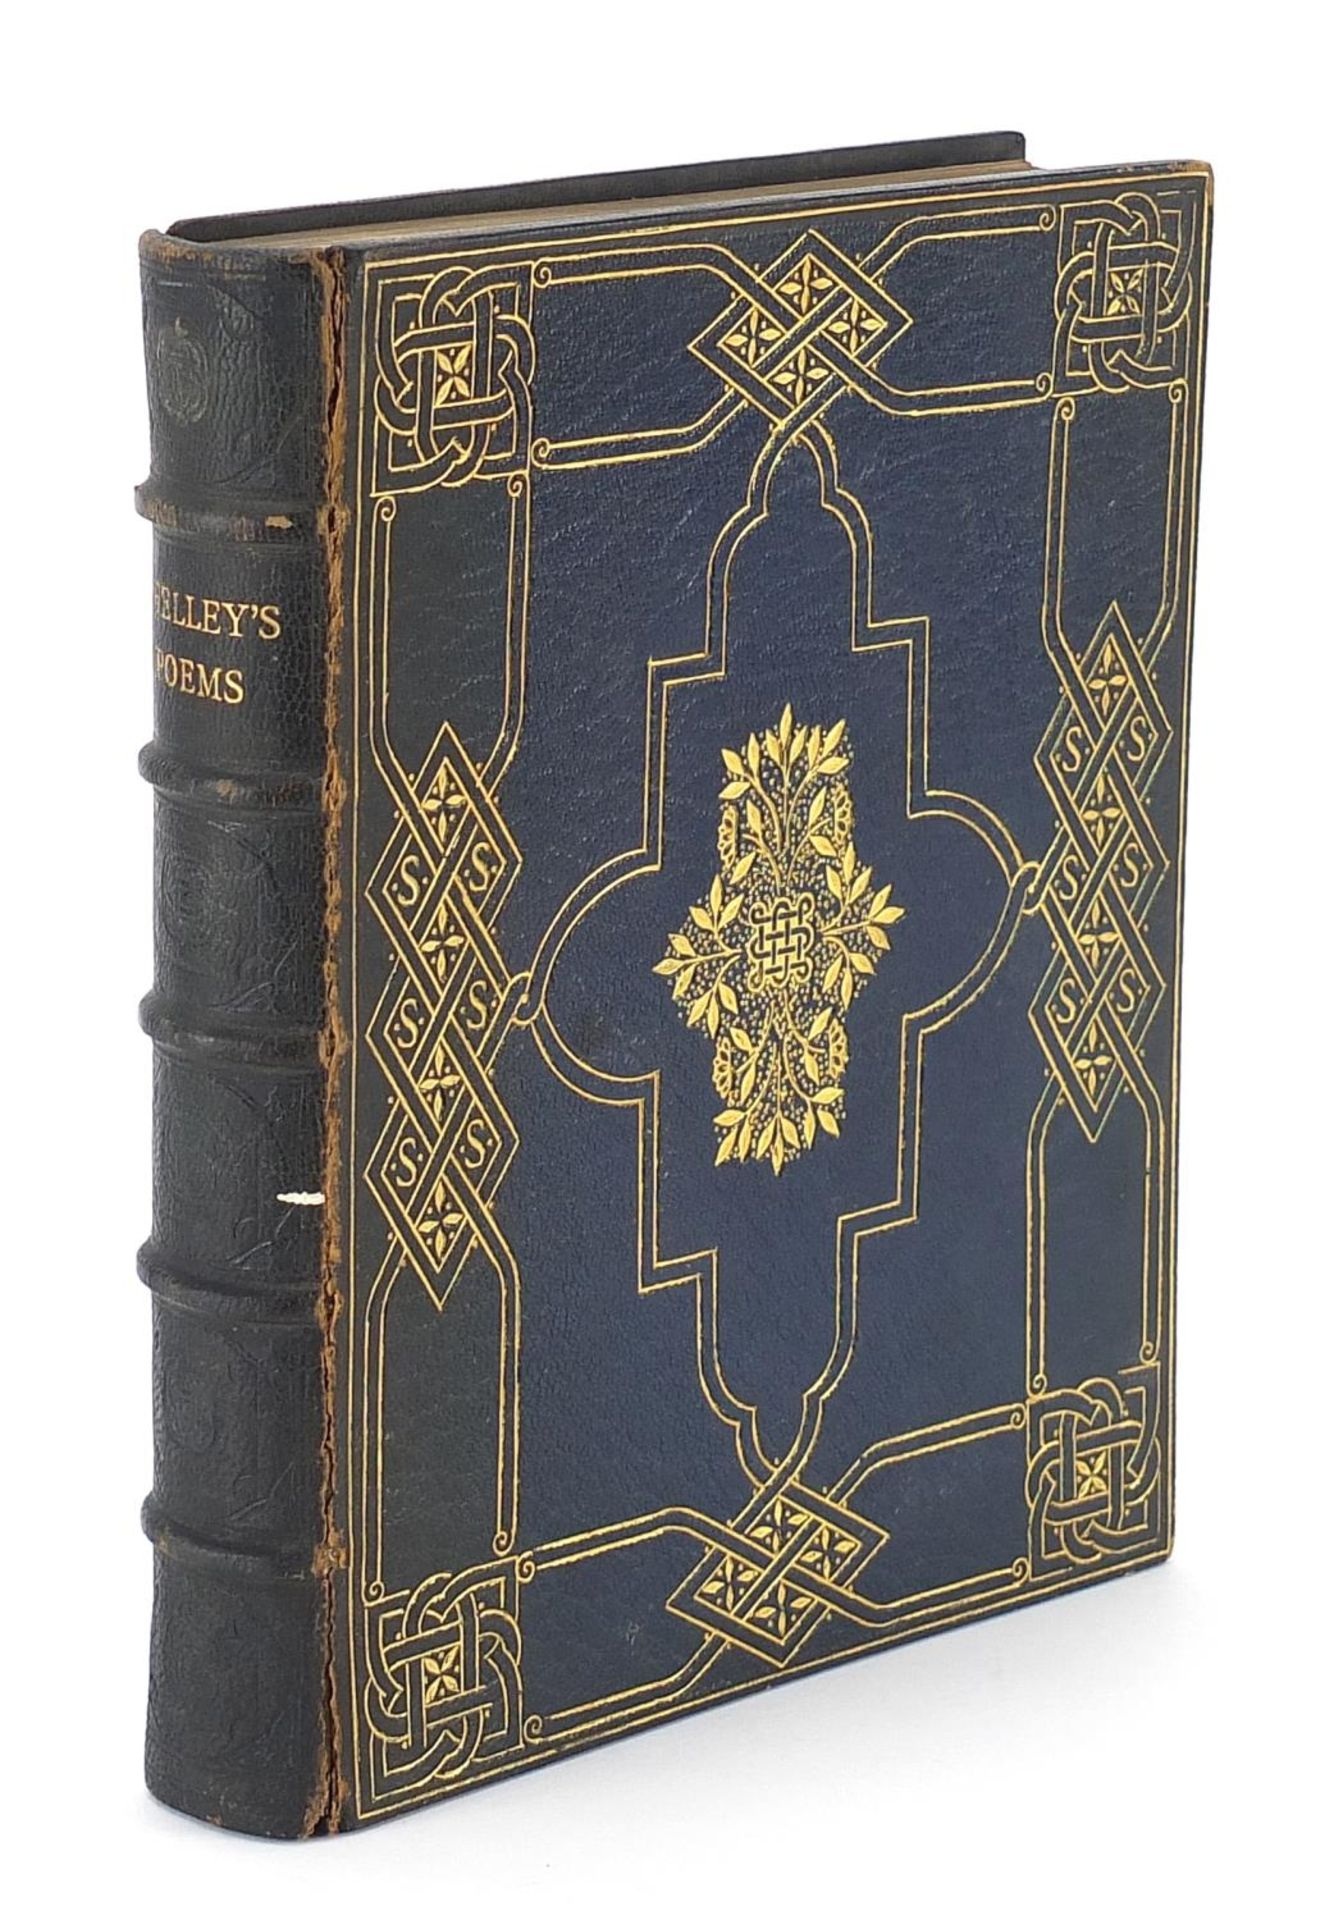 Poems by Percy Bysshe Shelley, tooled leather hardback book, edition of five hundred copies